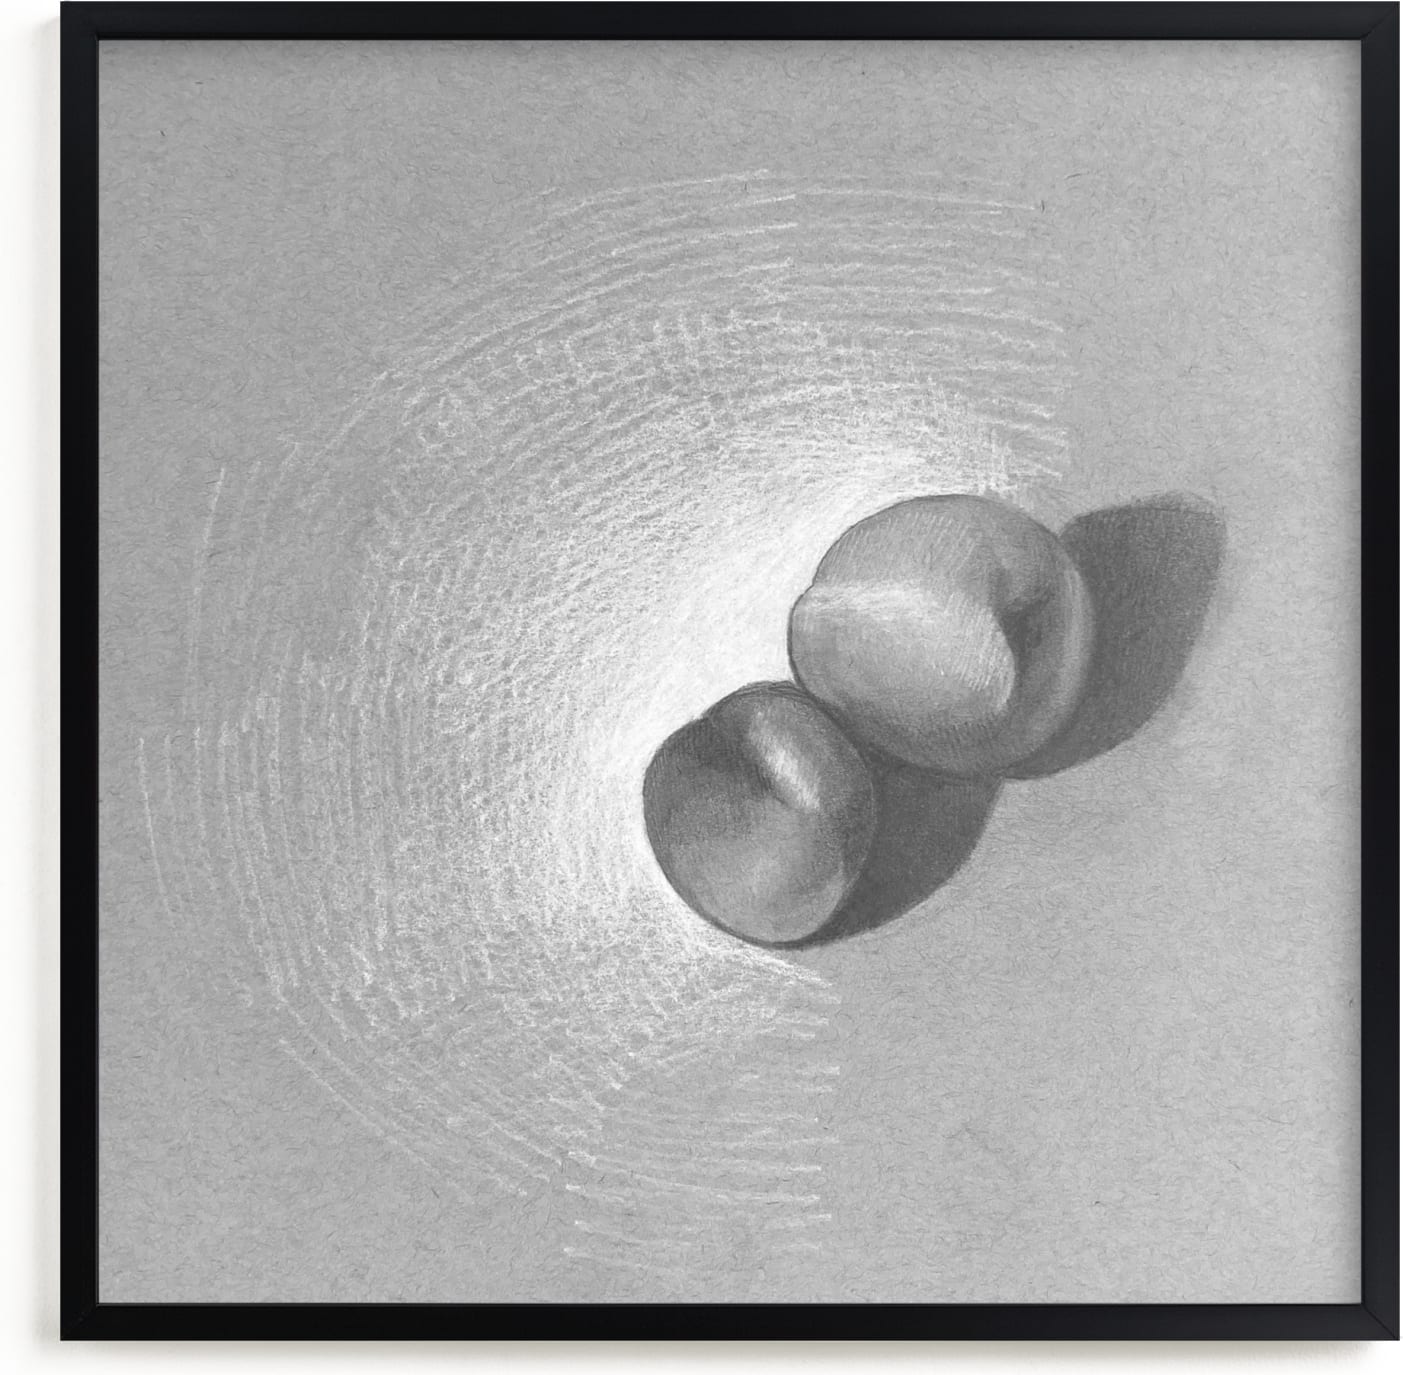 This is a silver art by Meghan Lacey called Two Peaches.